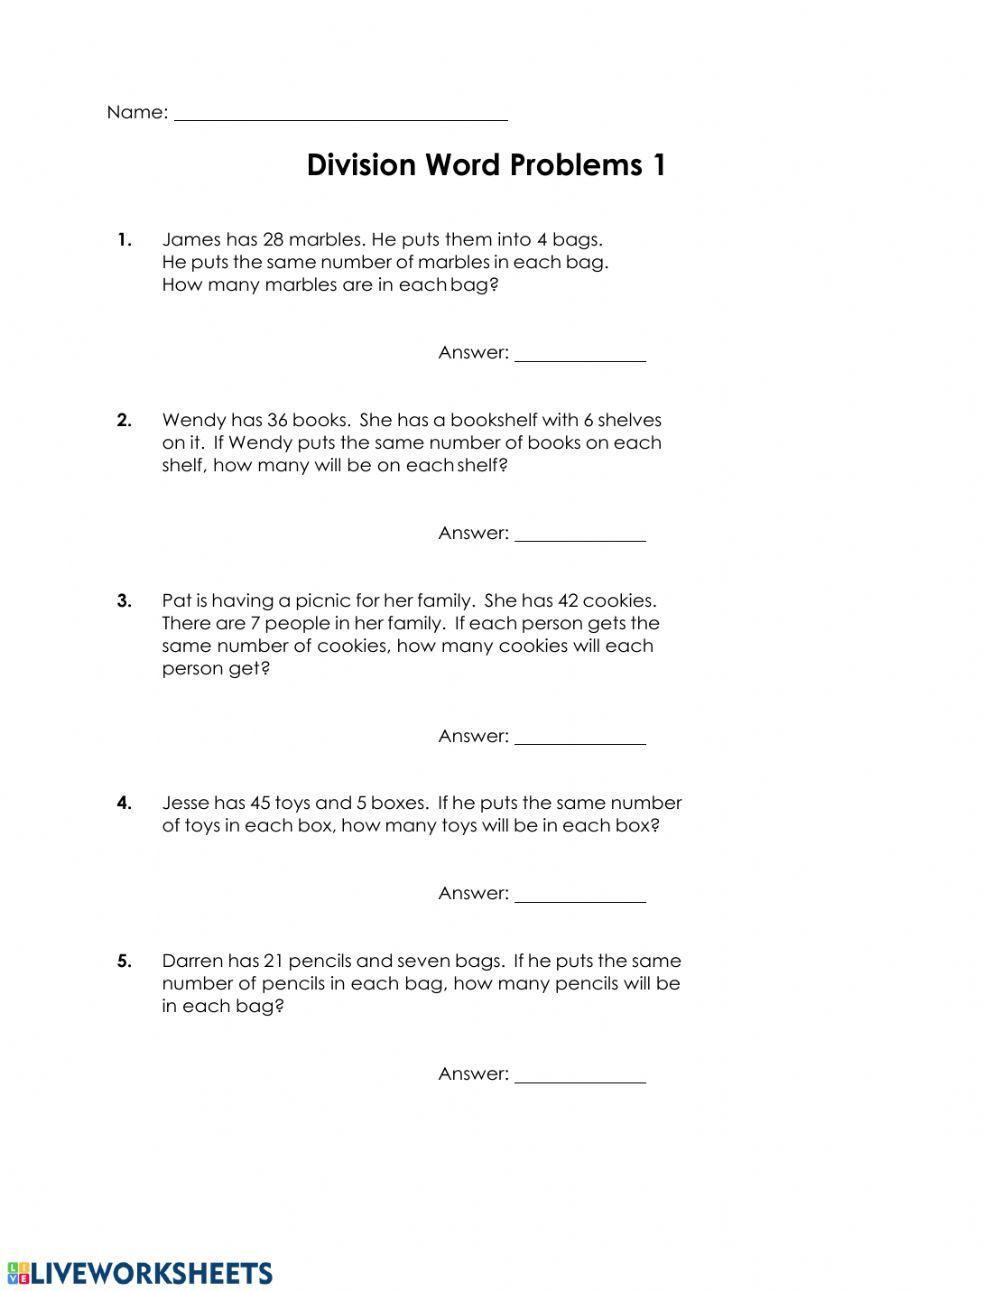 MA2-Monday (Division Word Problems 1)